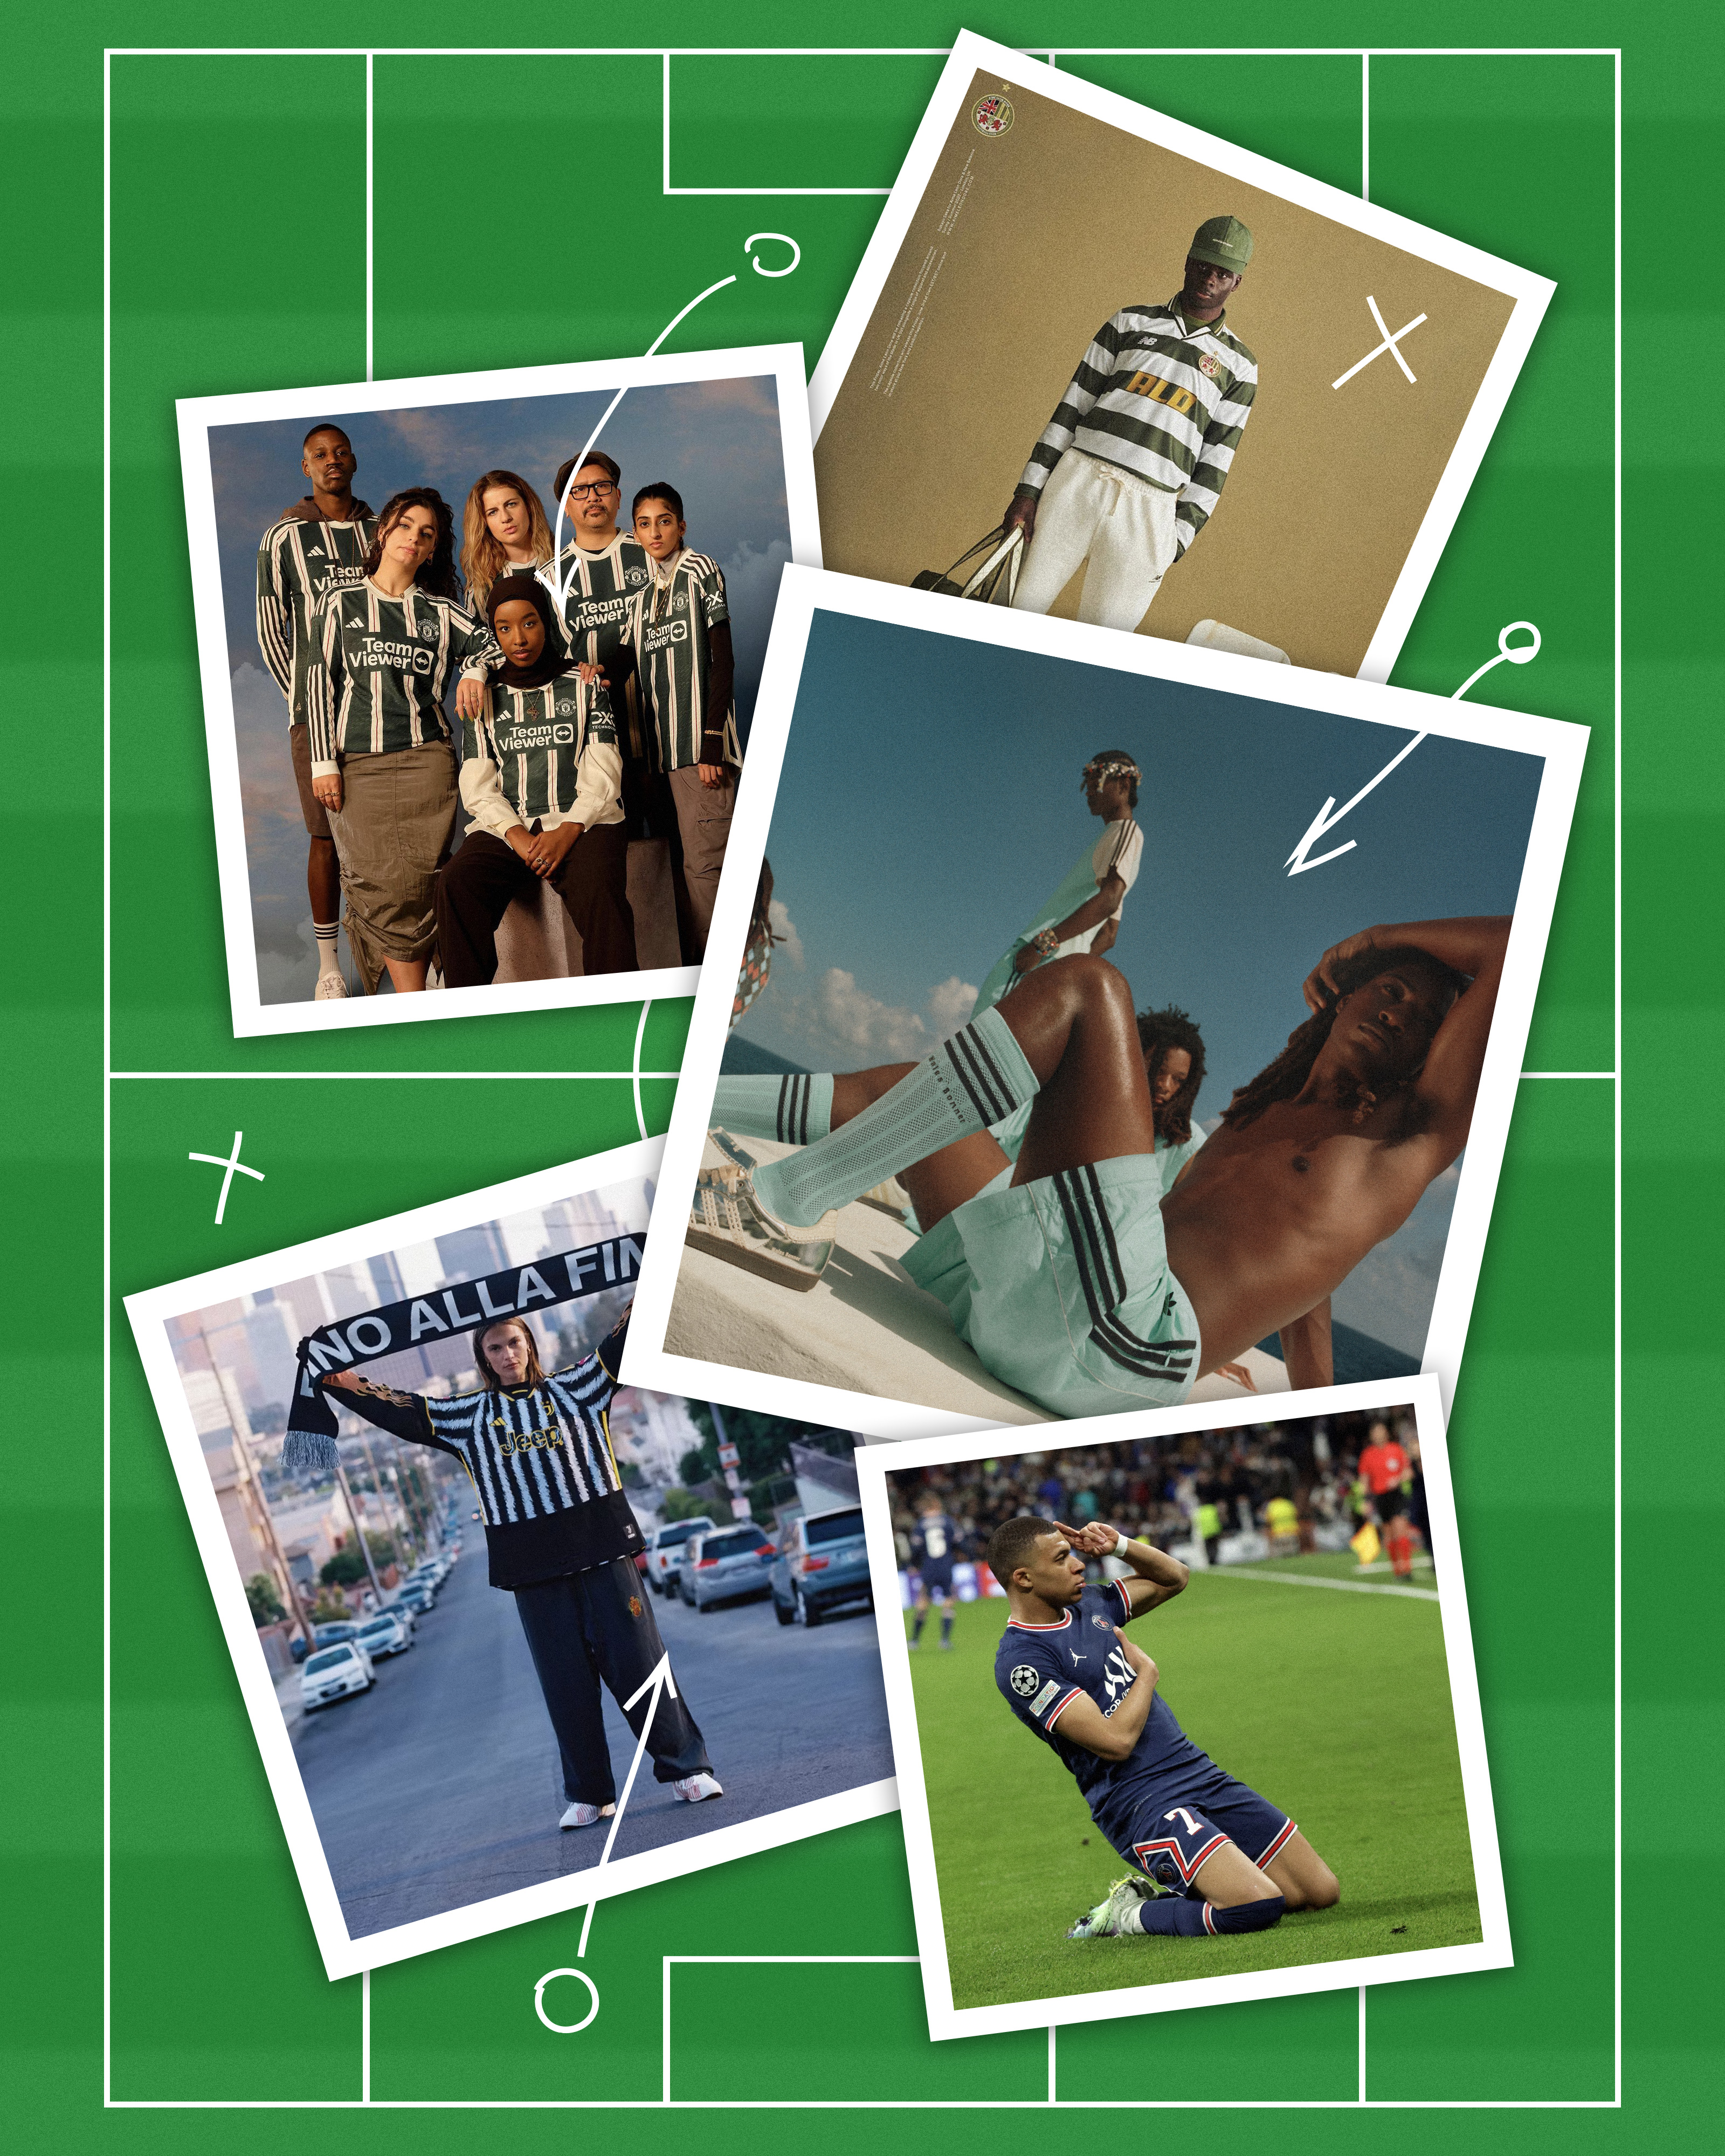 Football and fashion guide